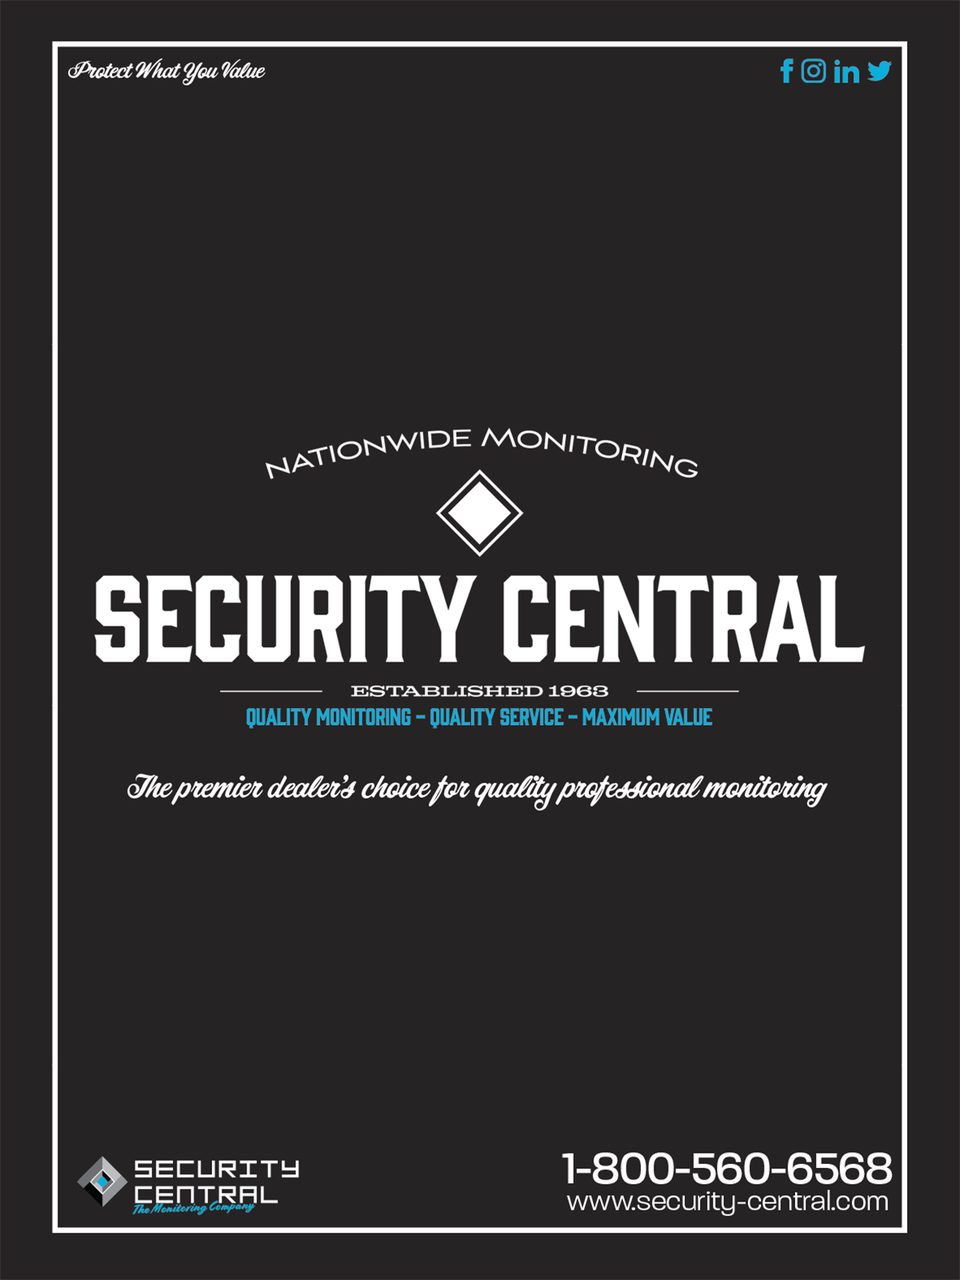 Security Central advertisement